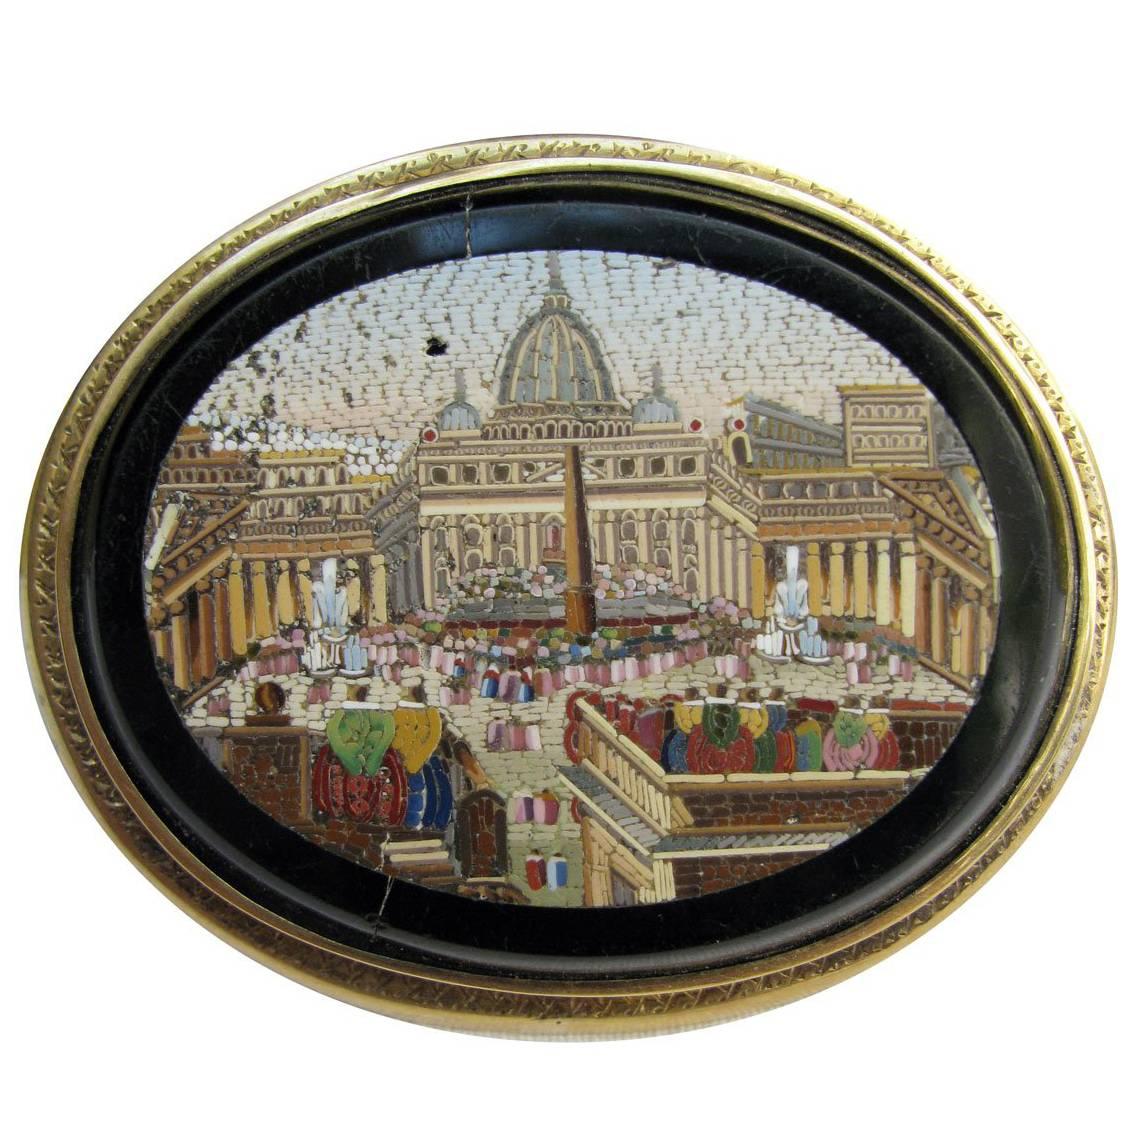 Grand Tour Micro Mosaic Brooch Featuring Saint Peter in Rome